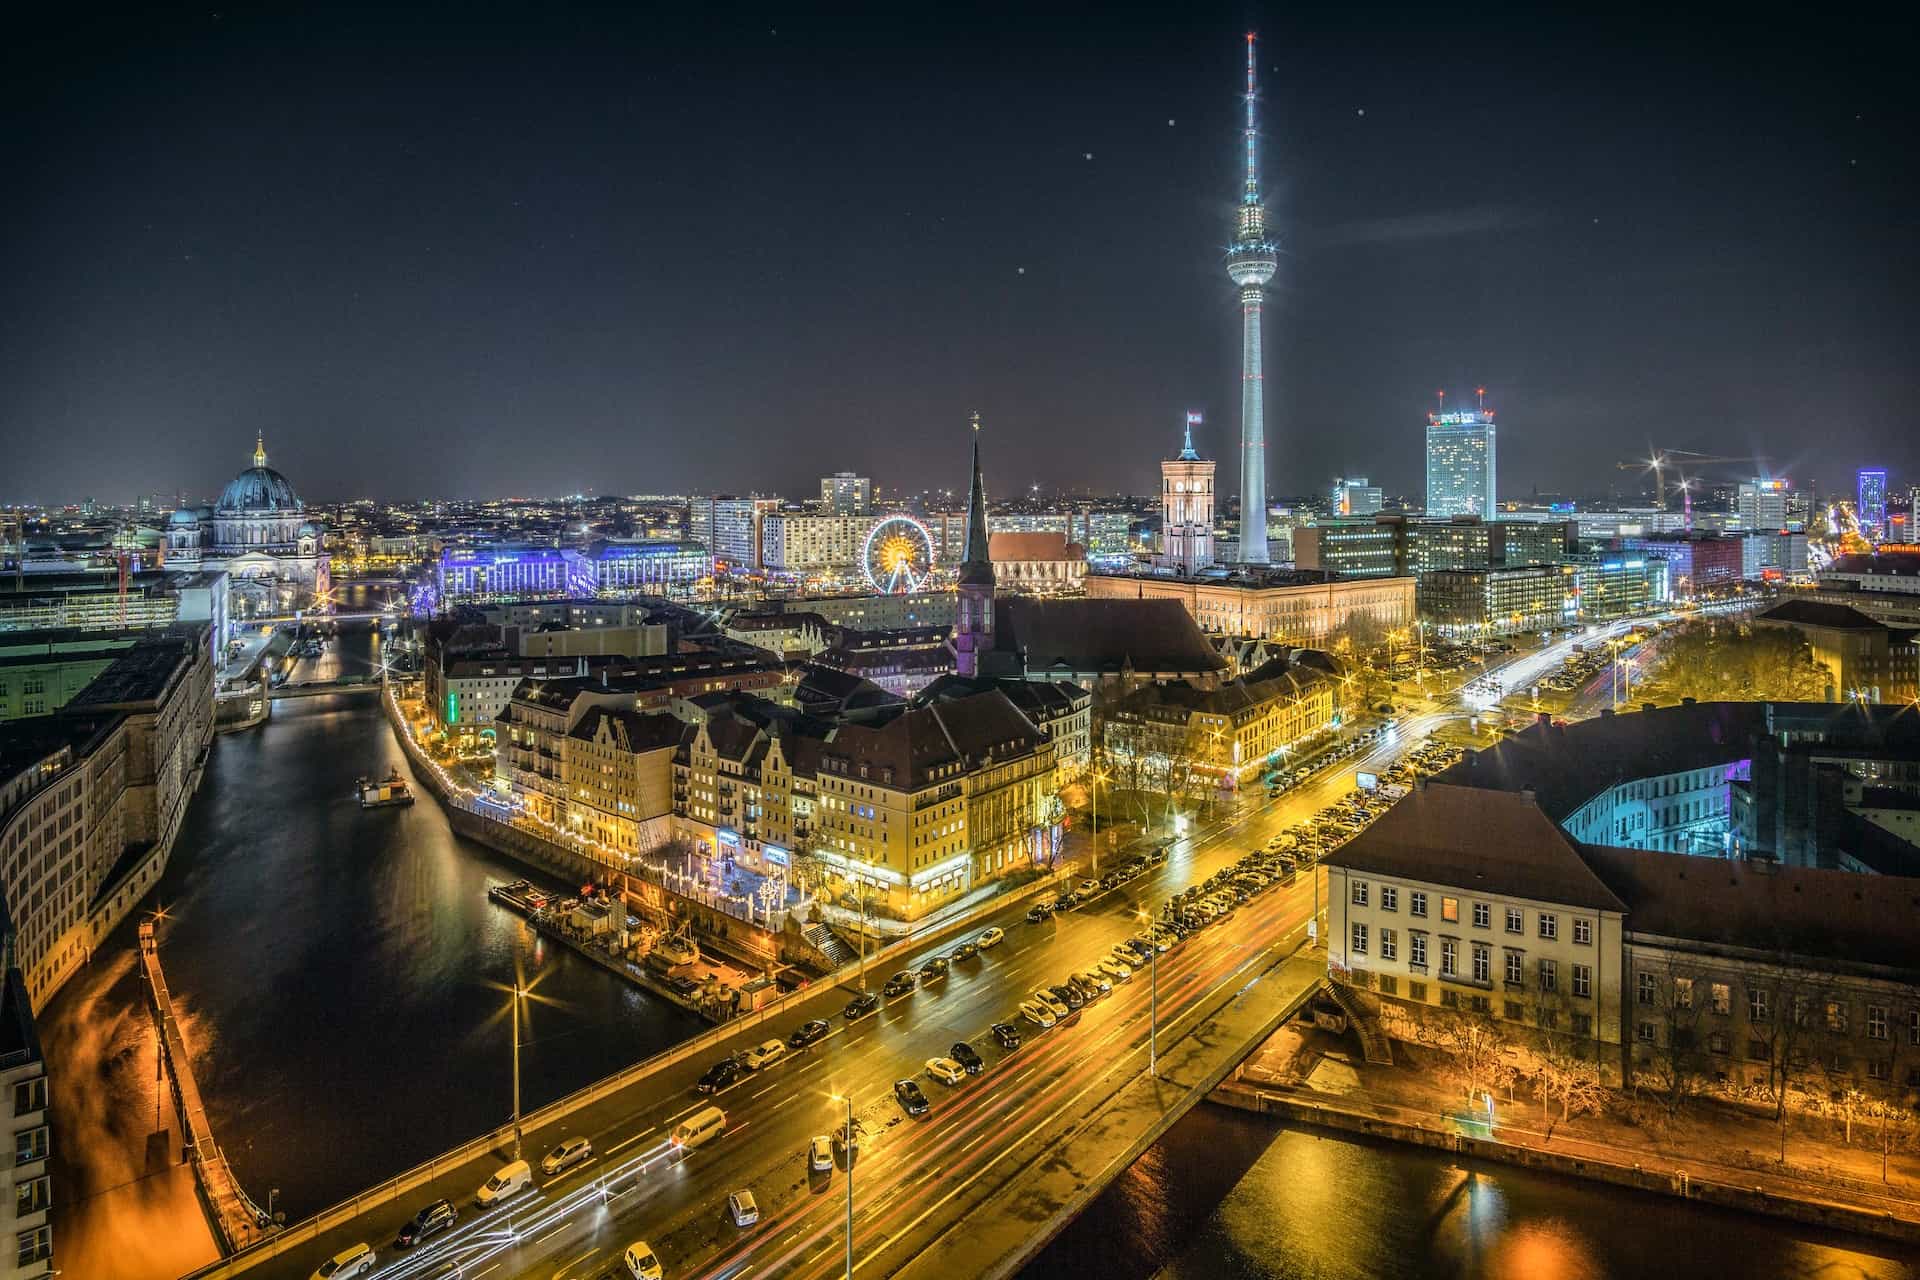 The city of Berlin gleaming at night.